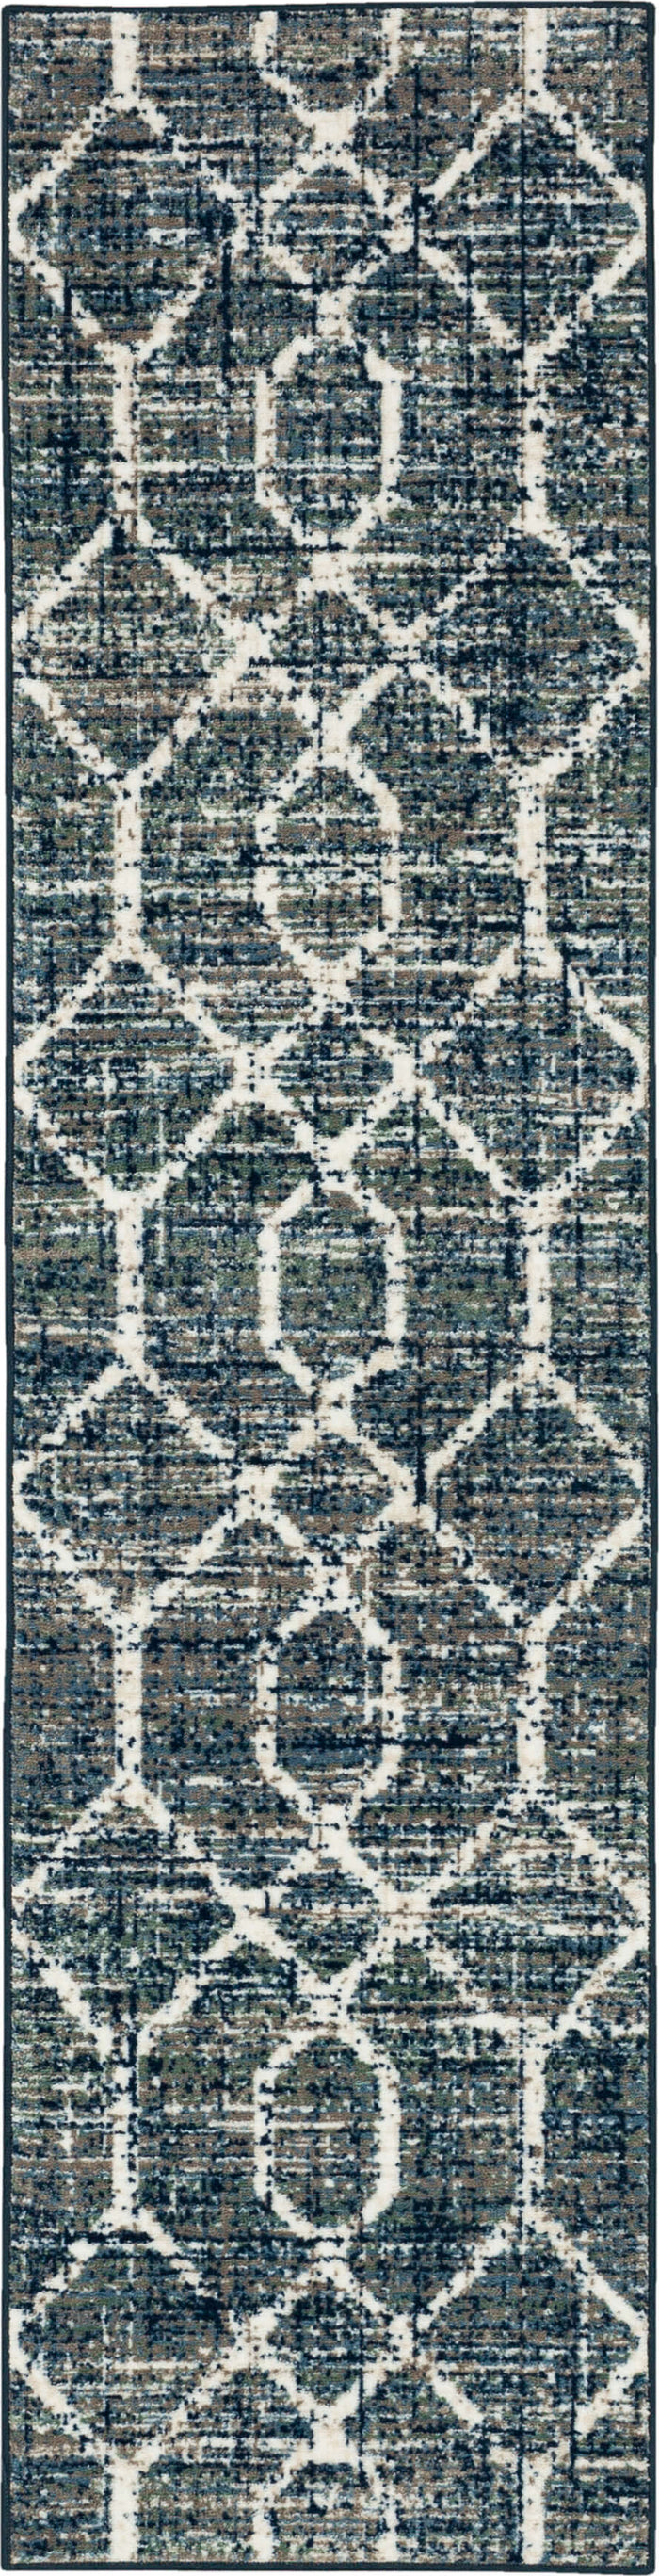 Leland Cool Area Rug by Scott Living